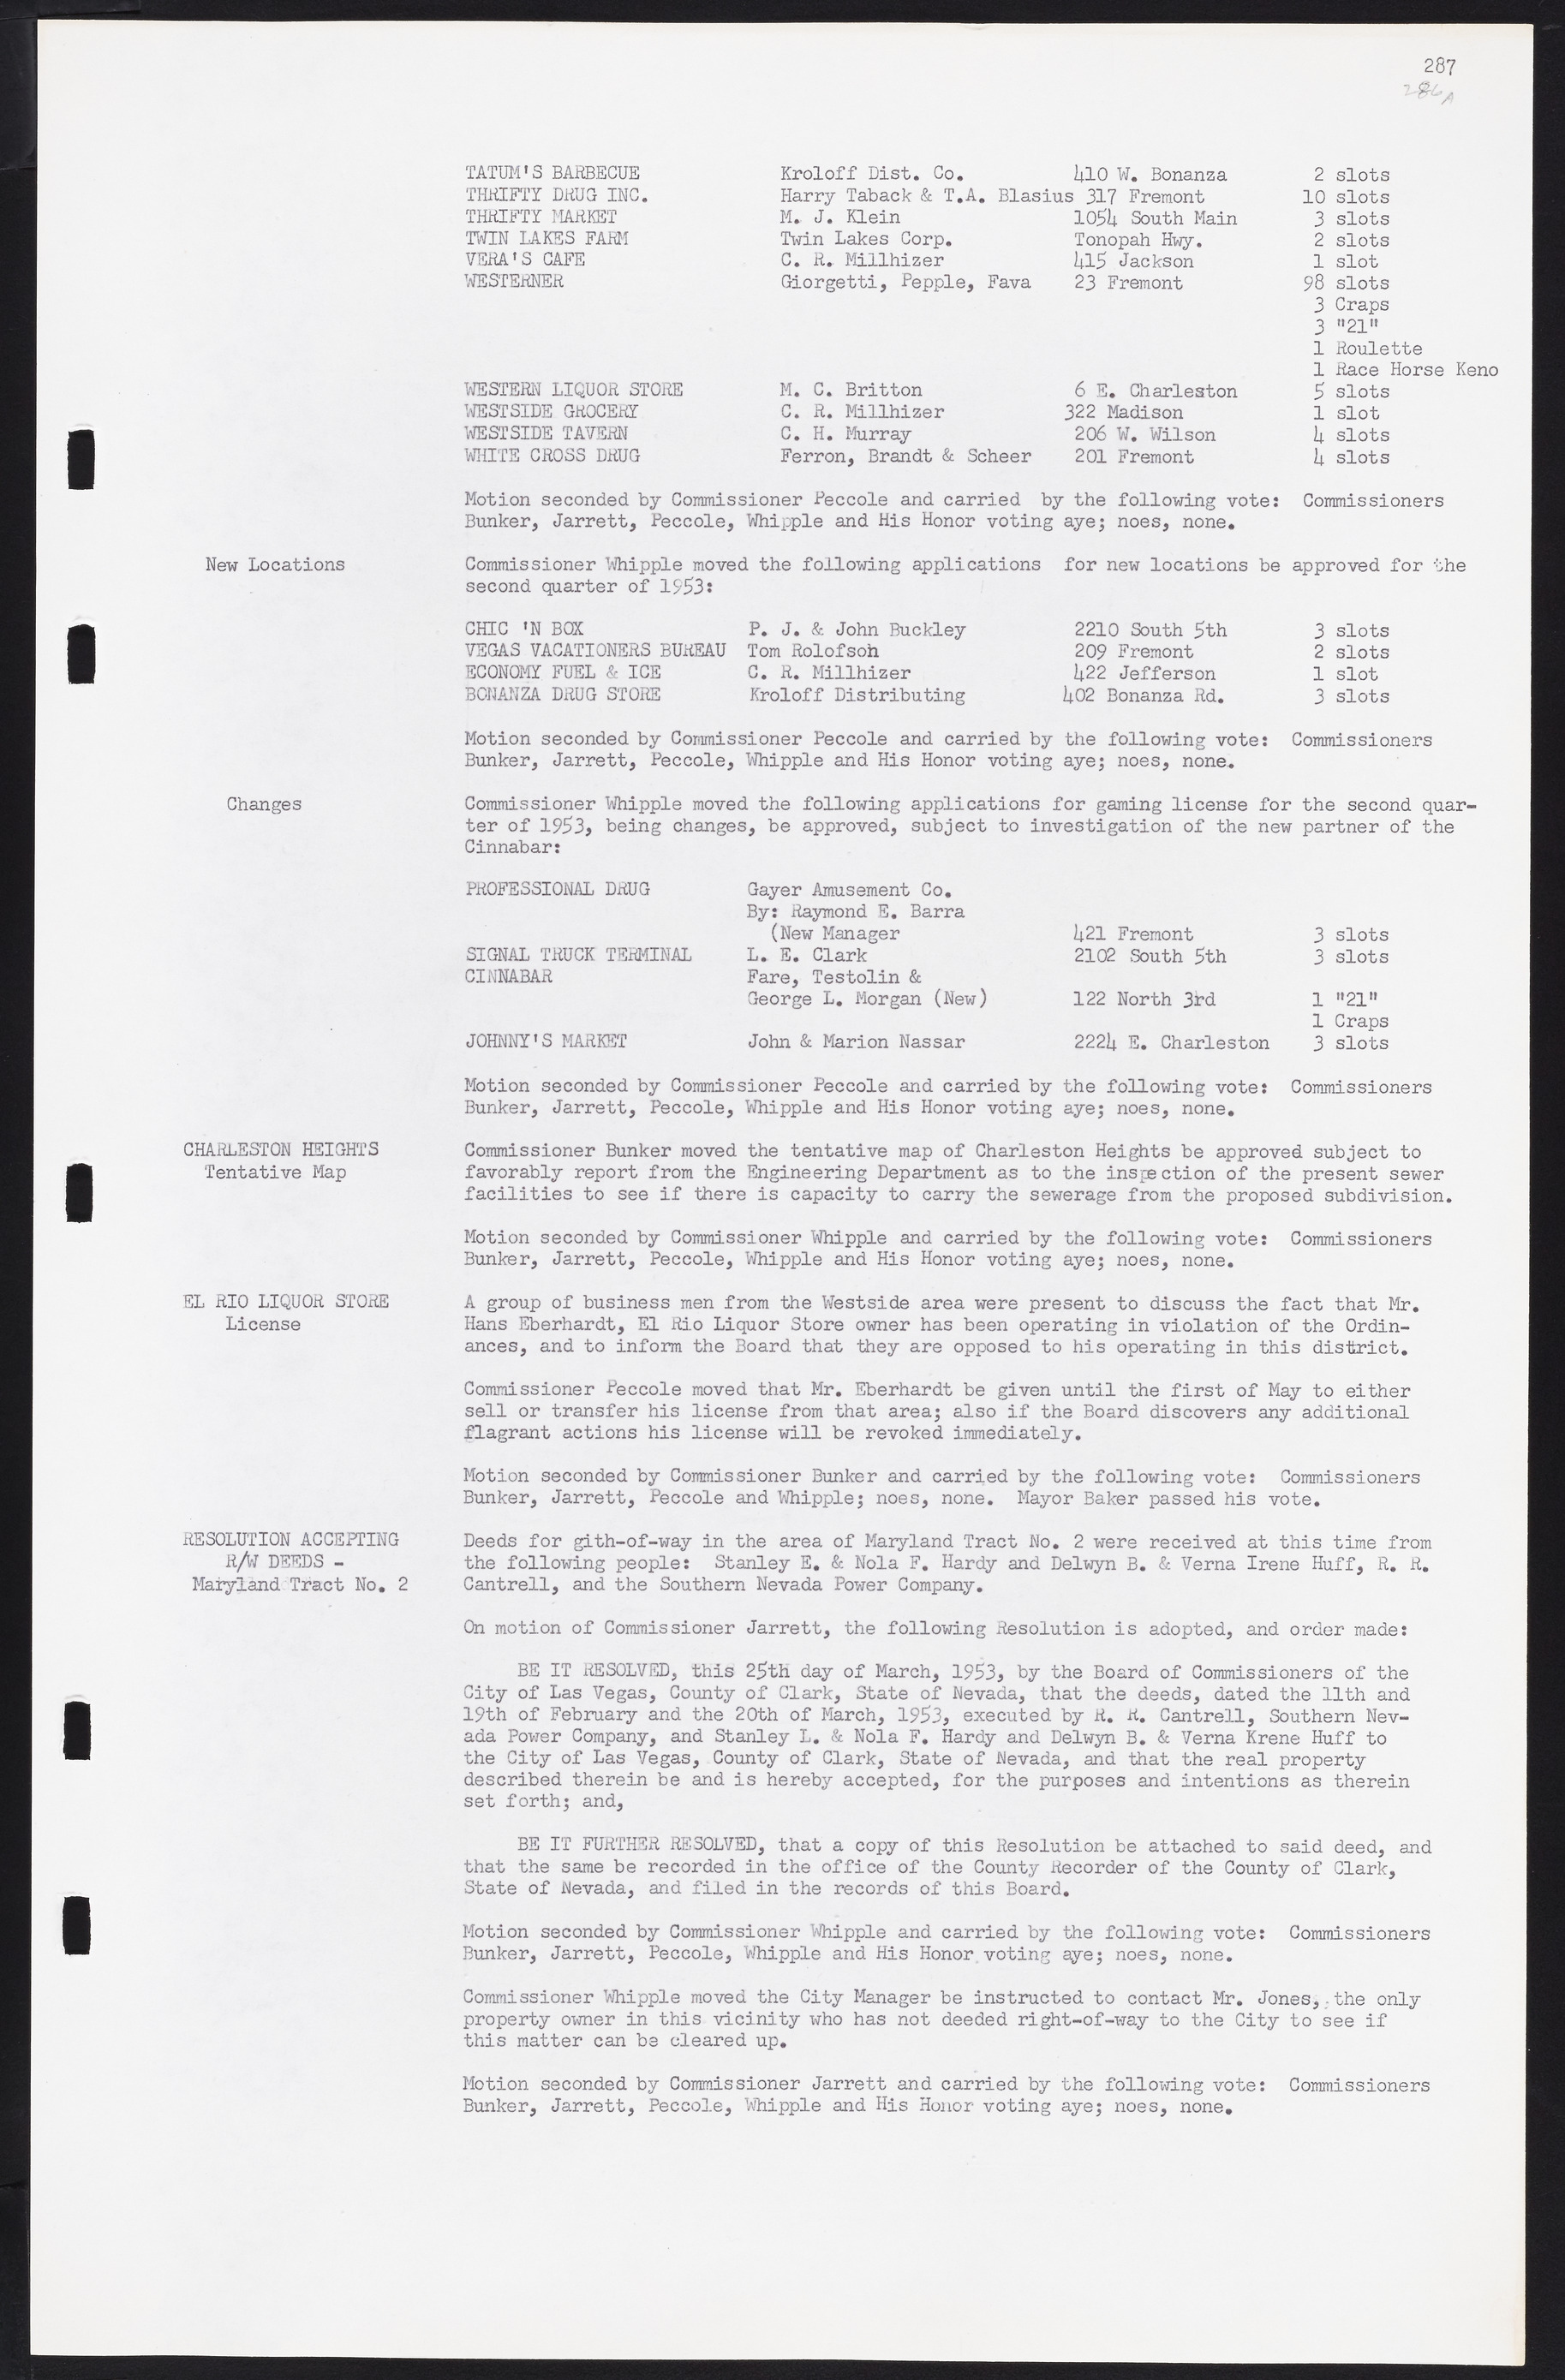 Las Vegas City Commission Minutes, May 26, 1952 to February 17, 1954, lvc000008-303